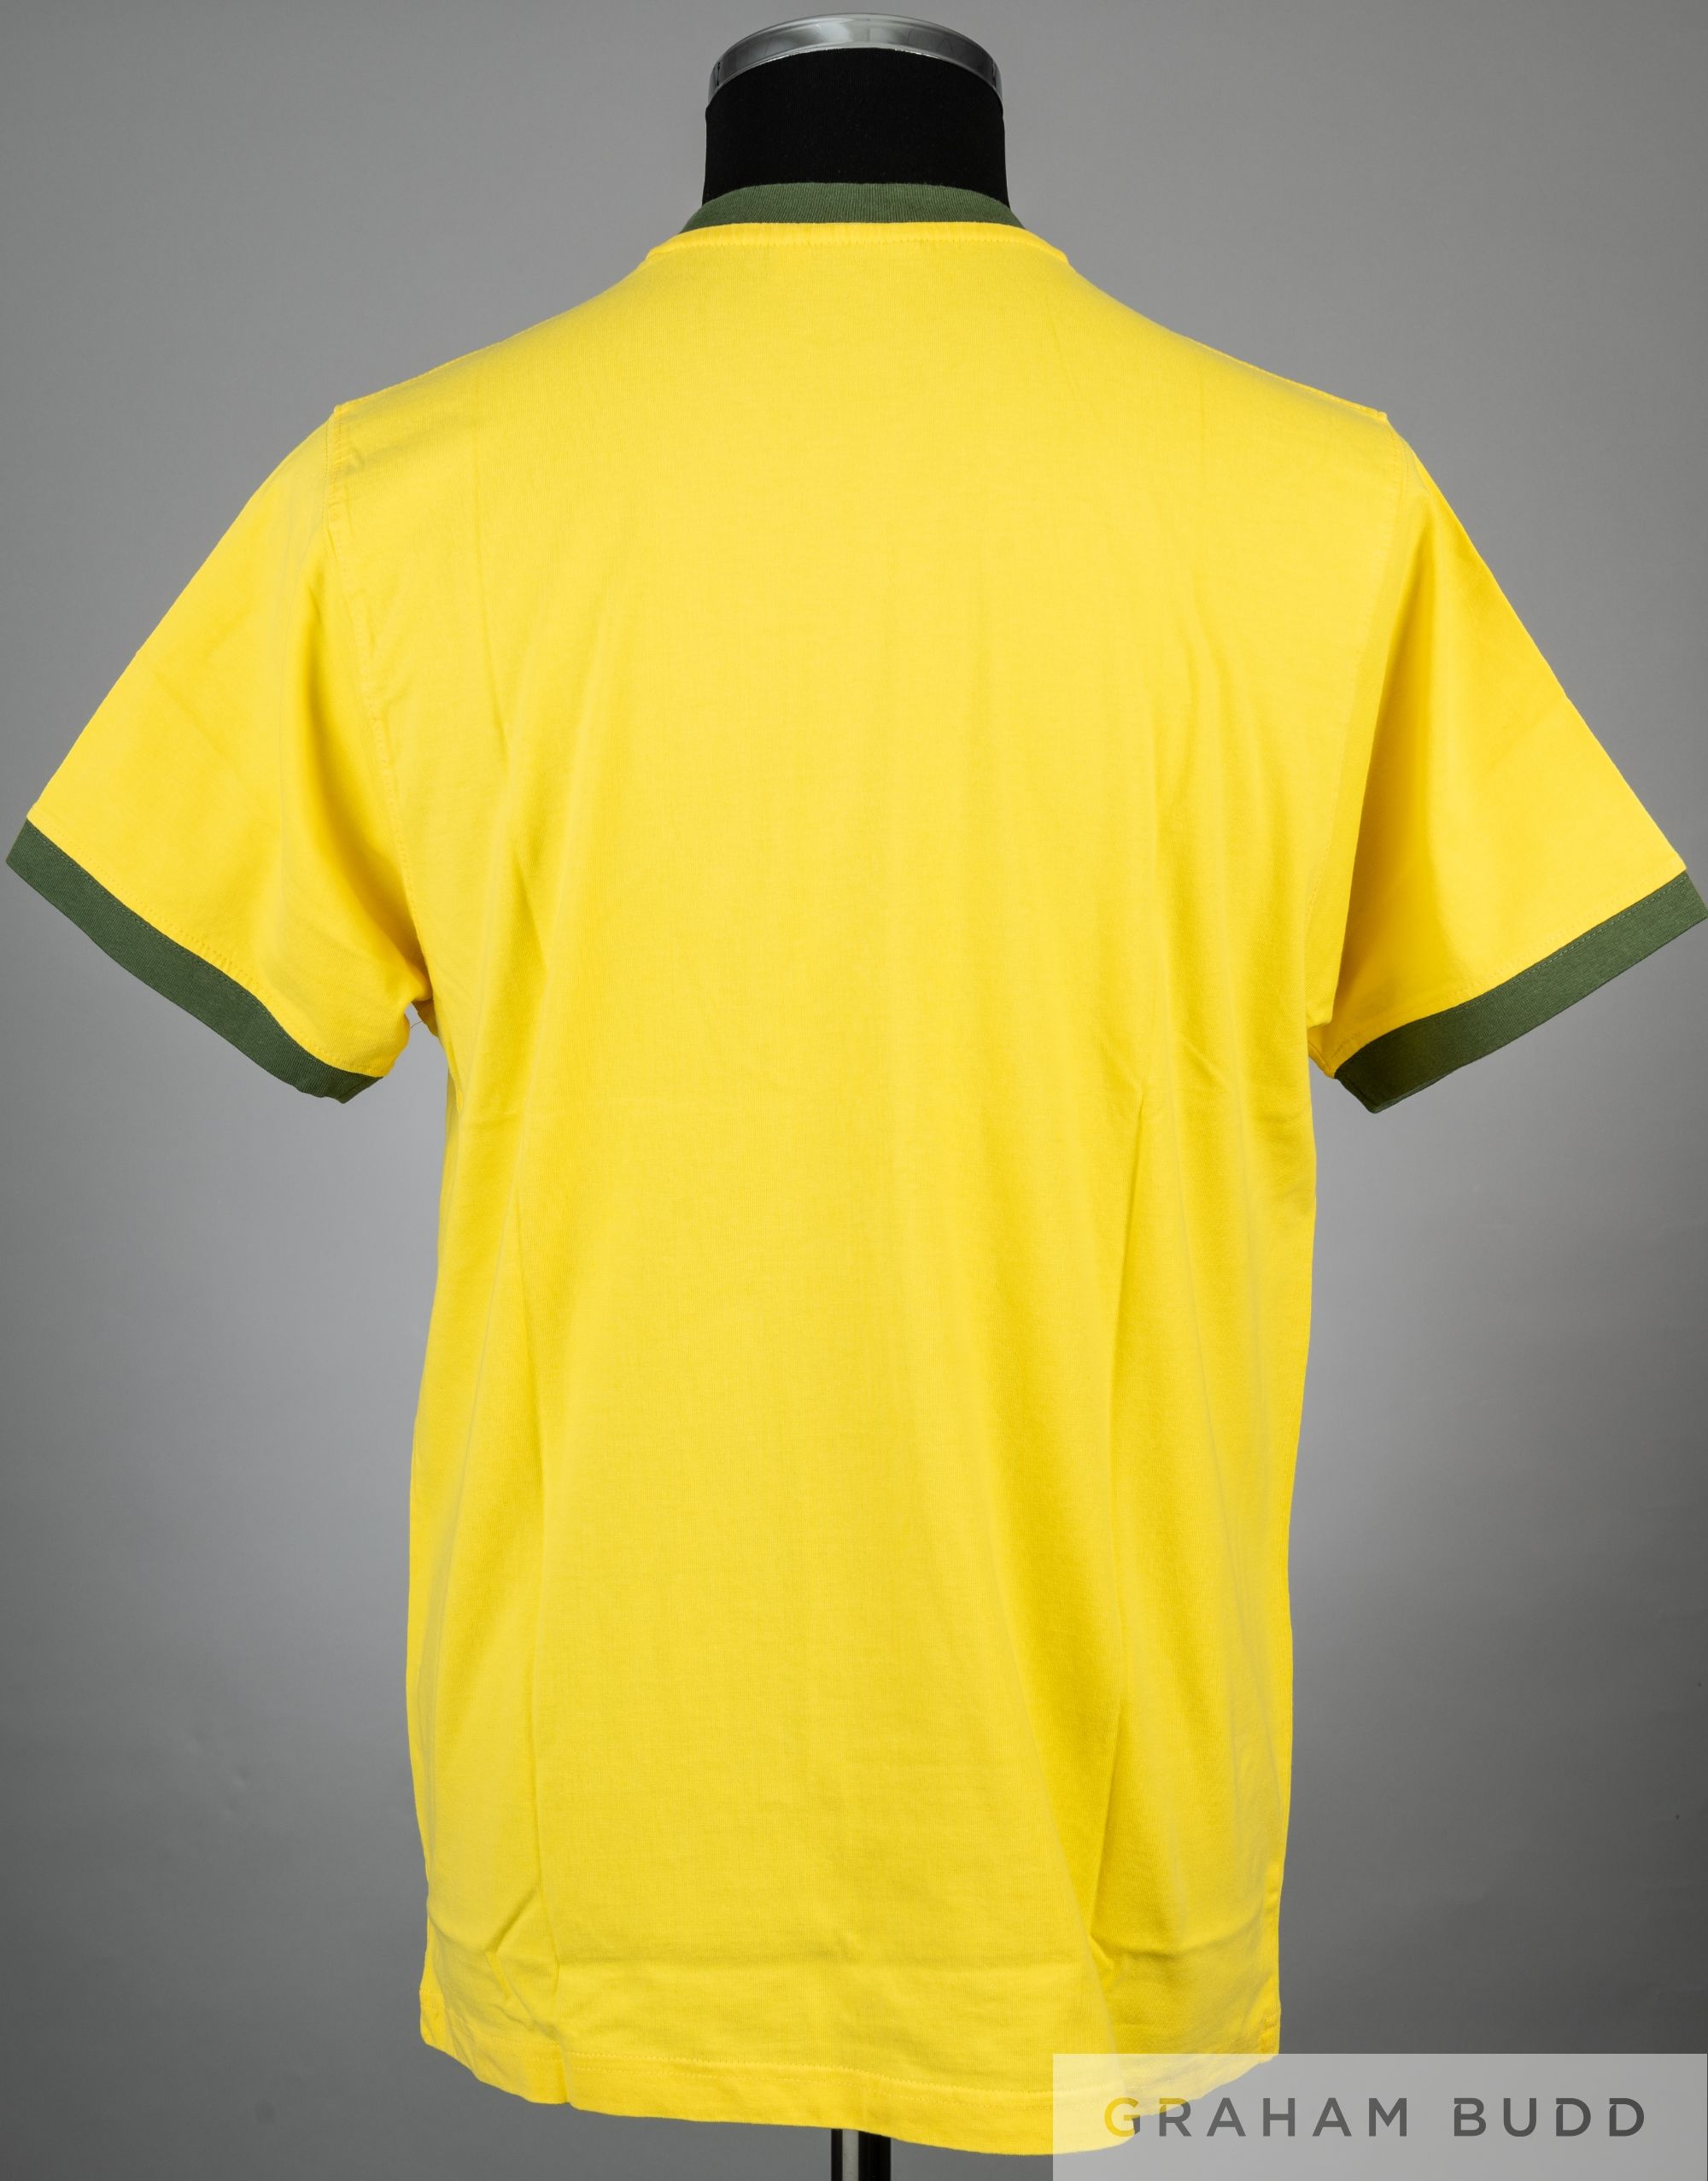 Edson Pele signed yellow and green Brazil 1970 World Cup replica jersey, Re-Take, short-sleeved with - Image 2 of 2